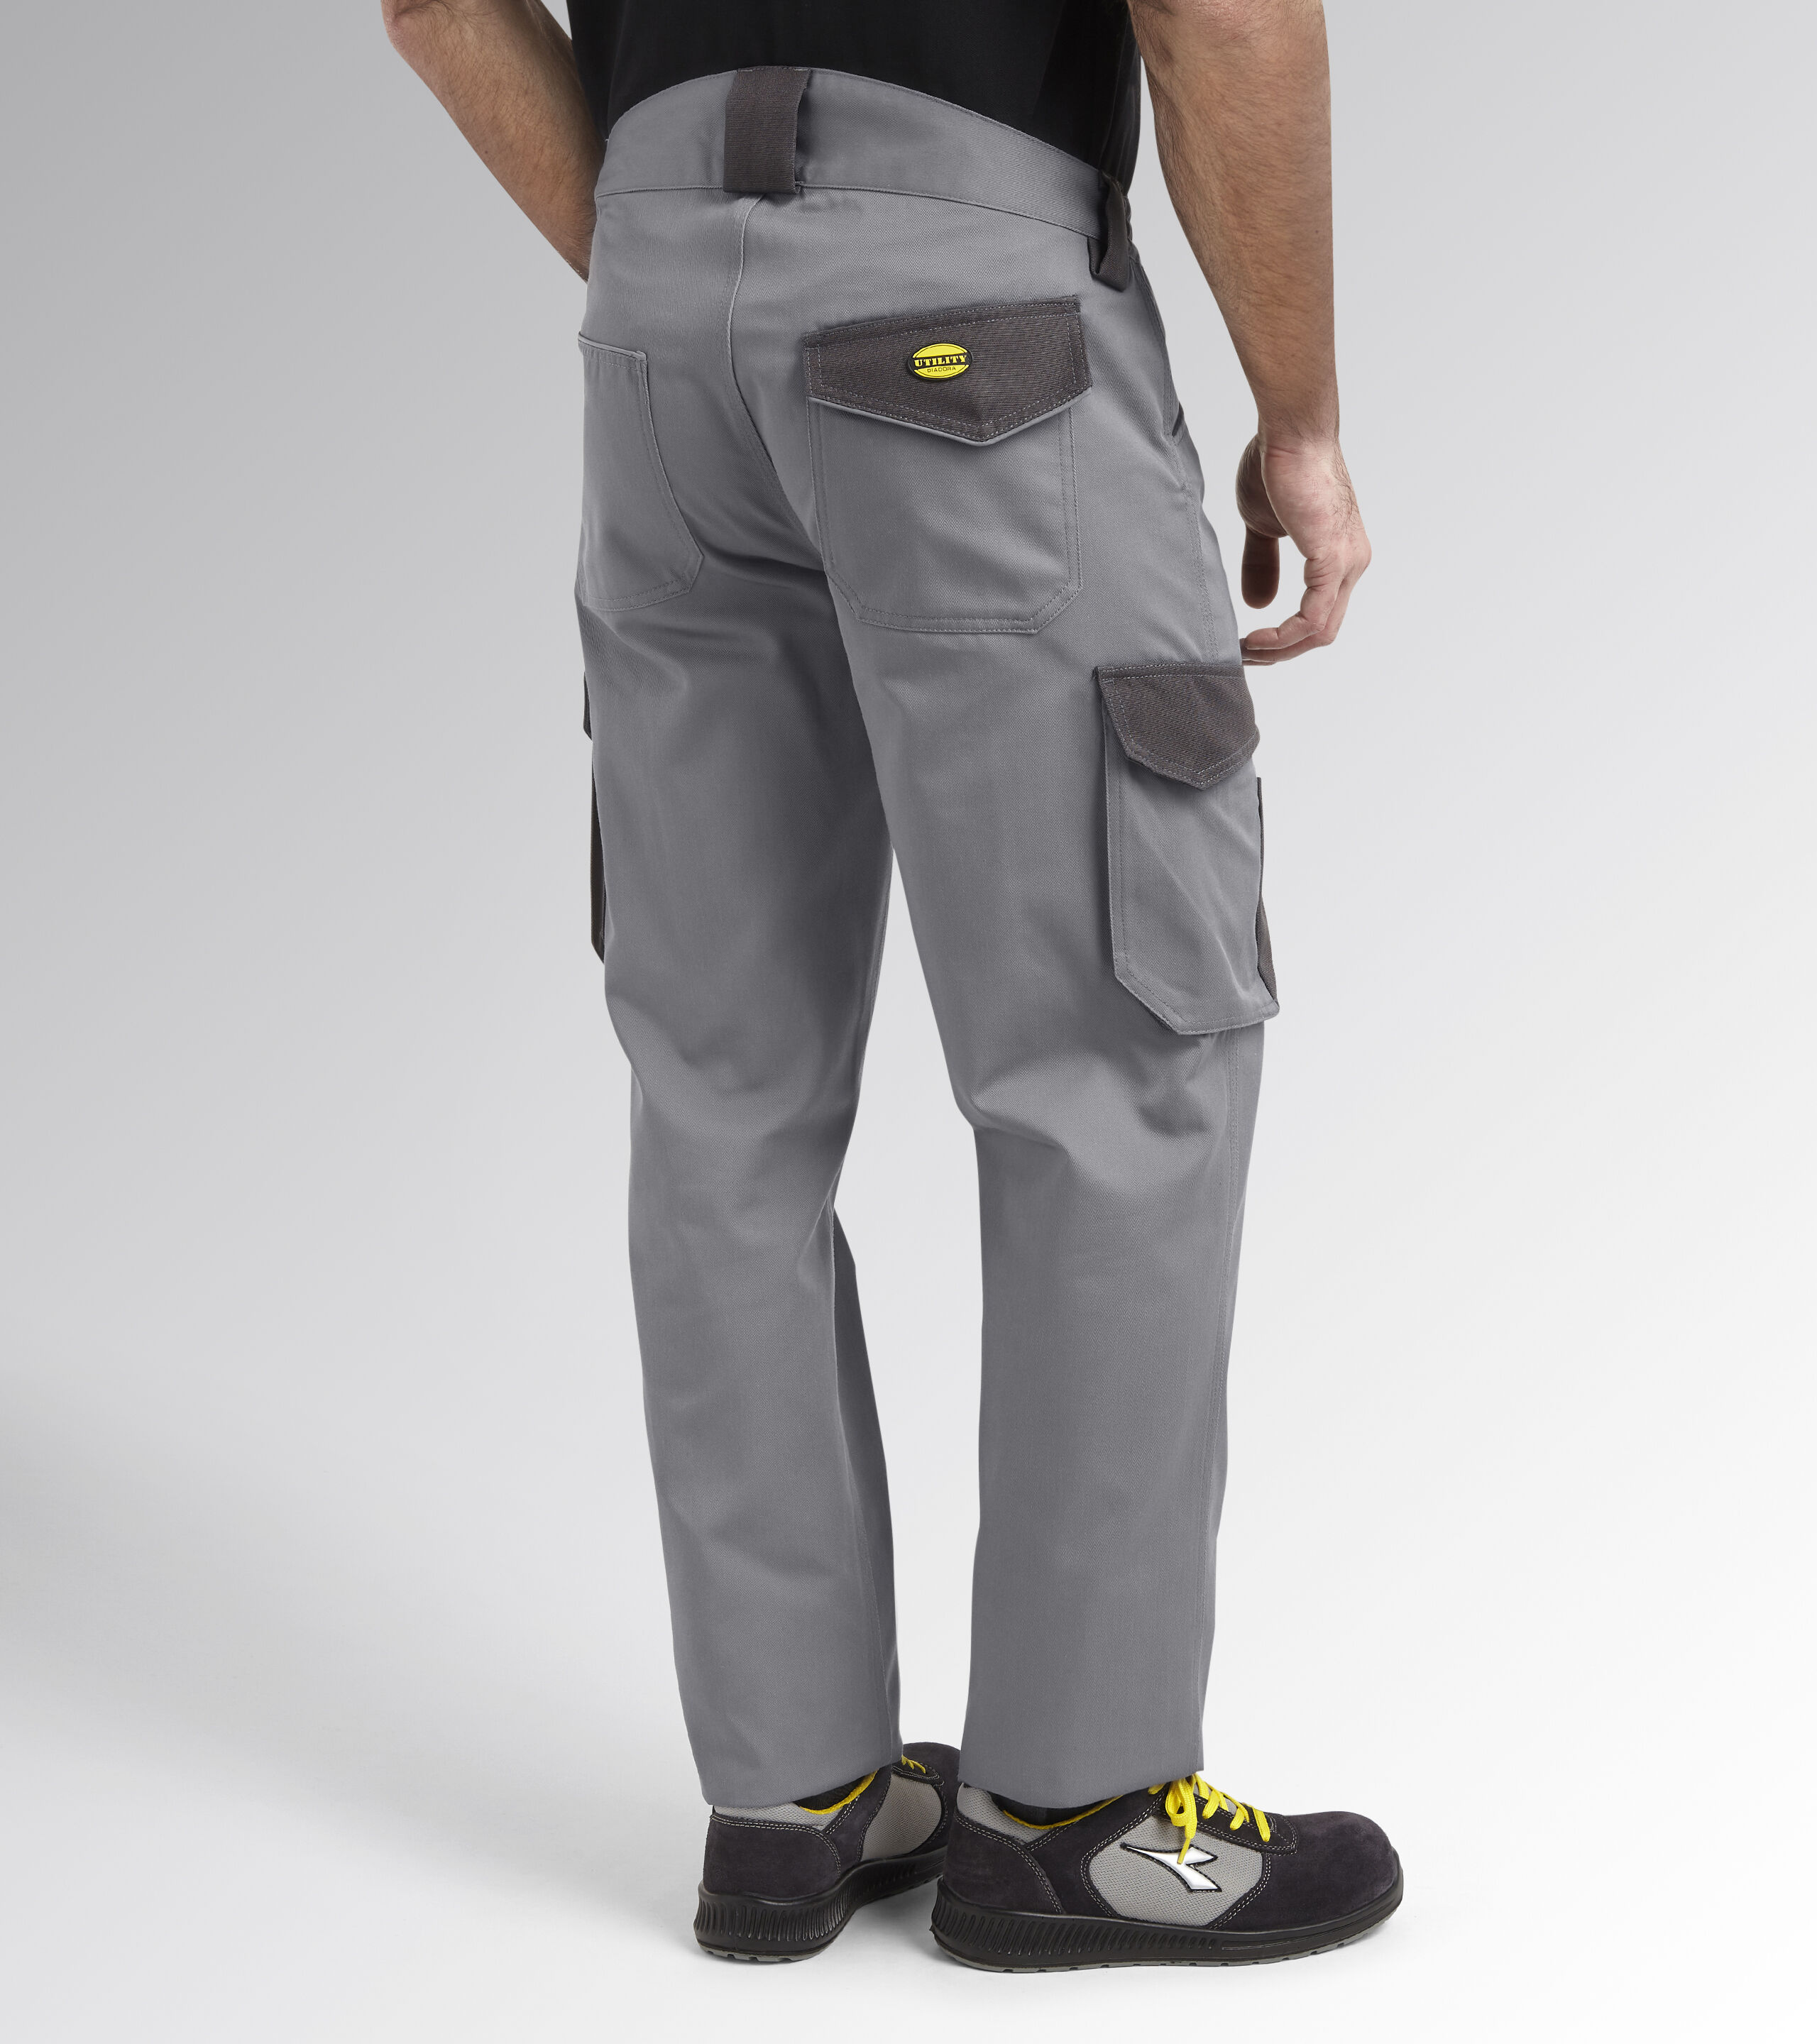 Cofra Winter Frozen work trousers only £ 39.02